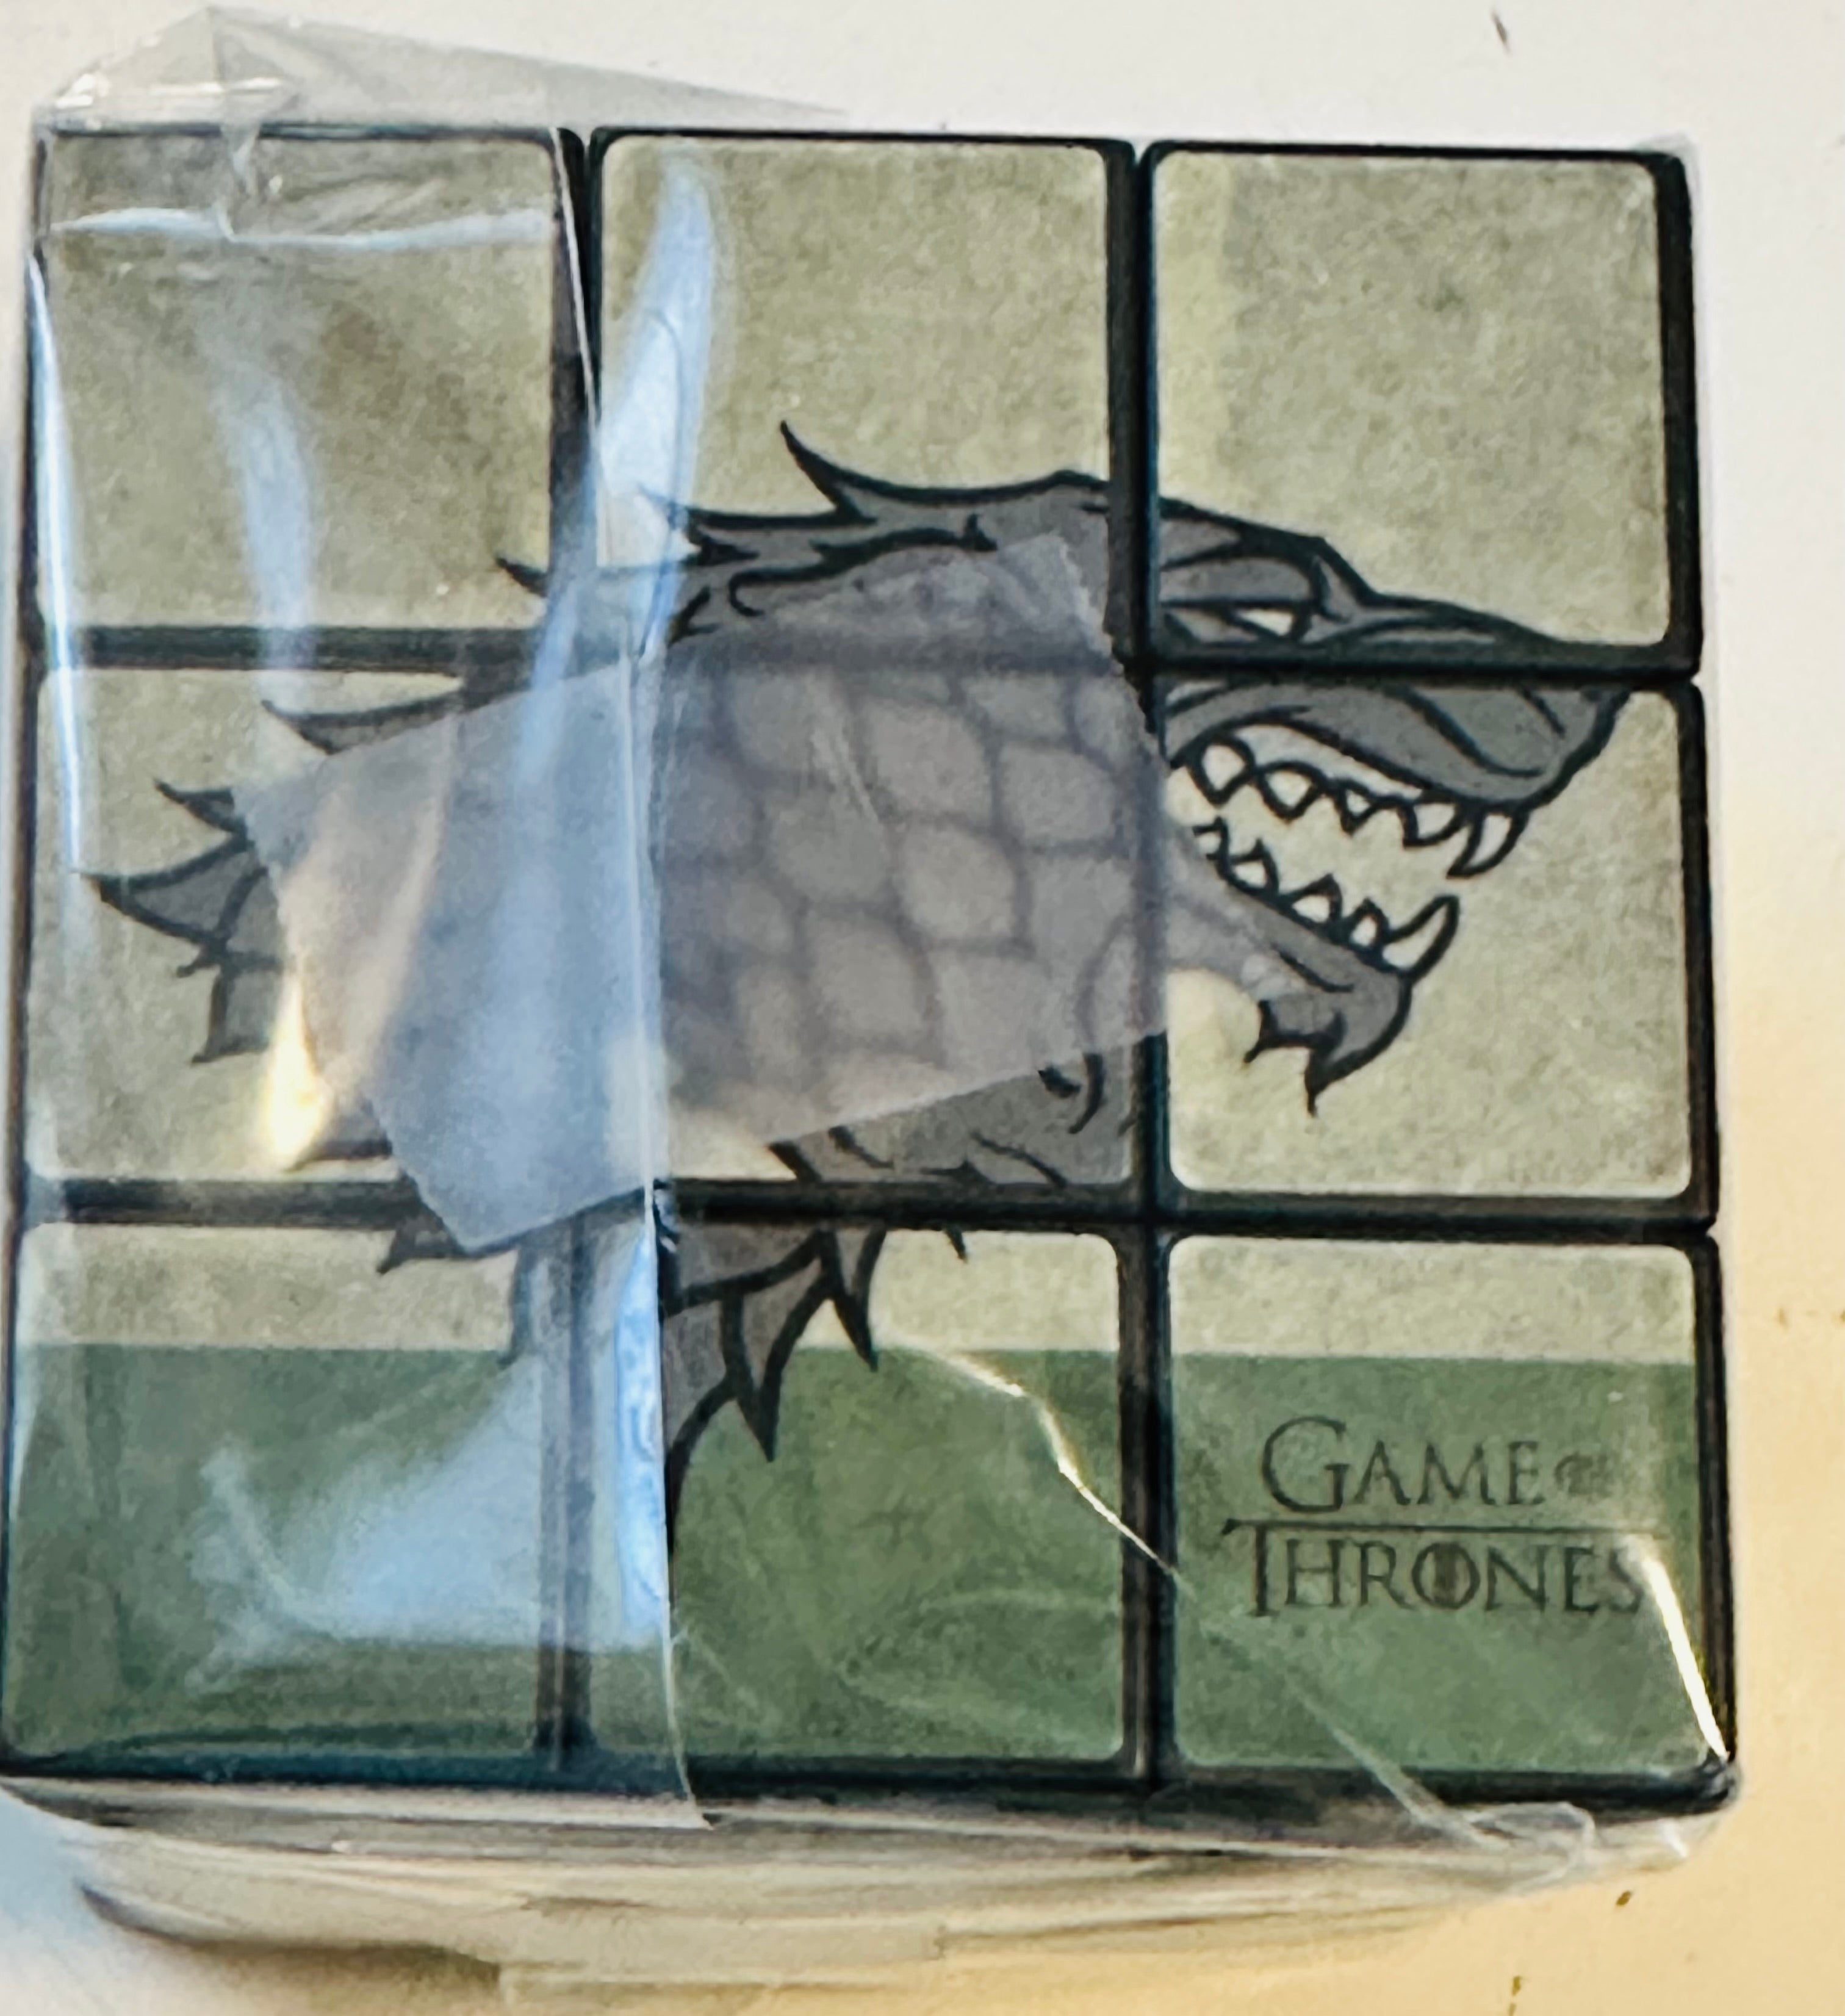 Game of Thrones HBO rare limited issued Rubix cube